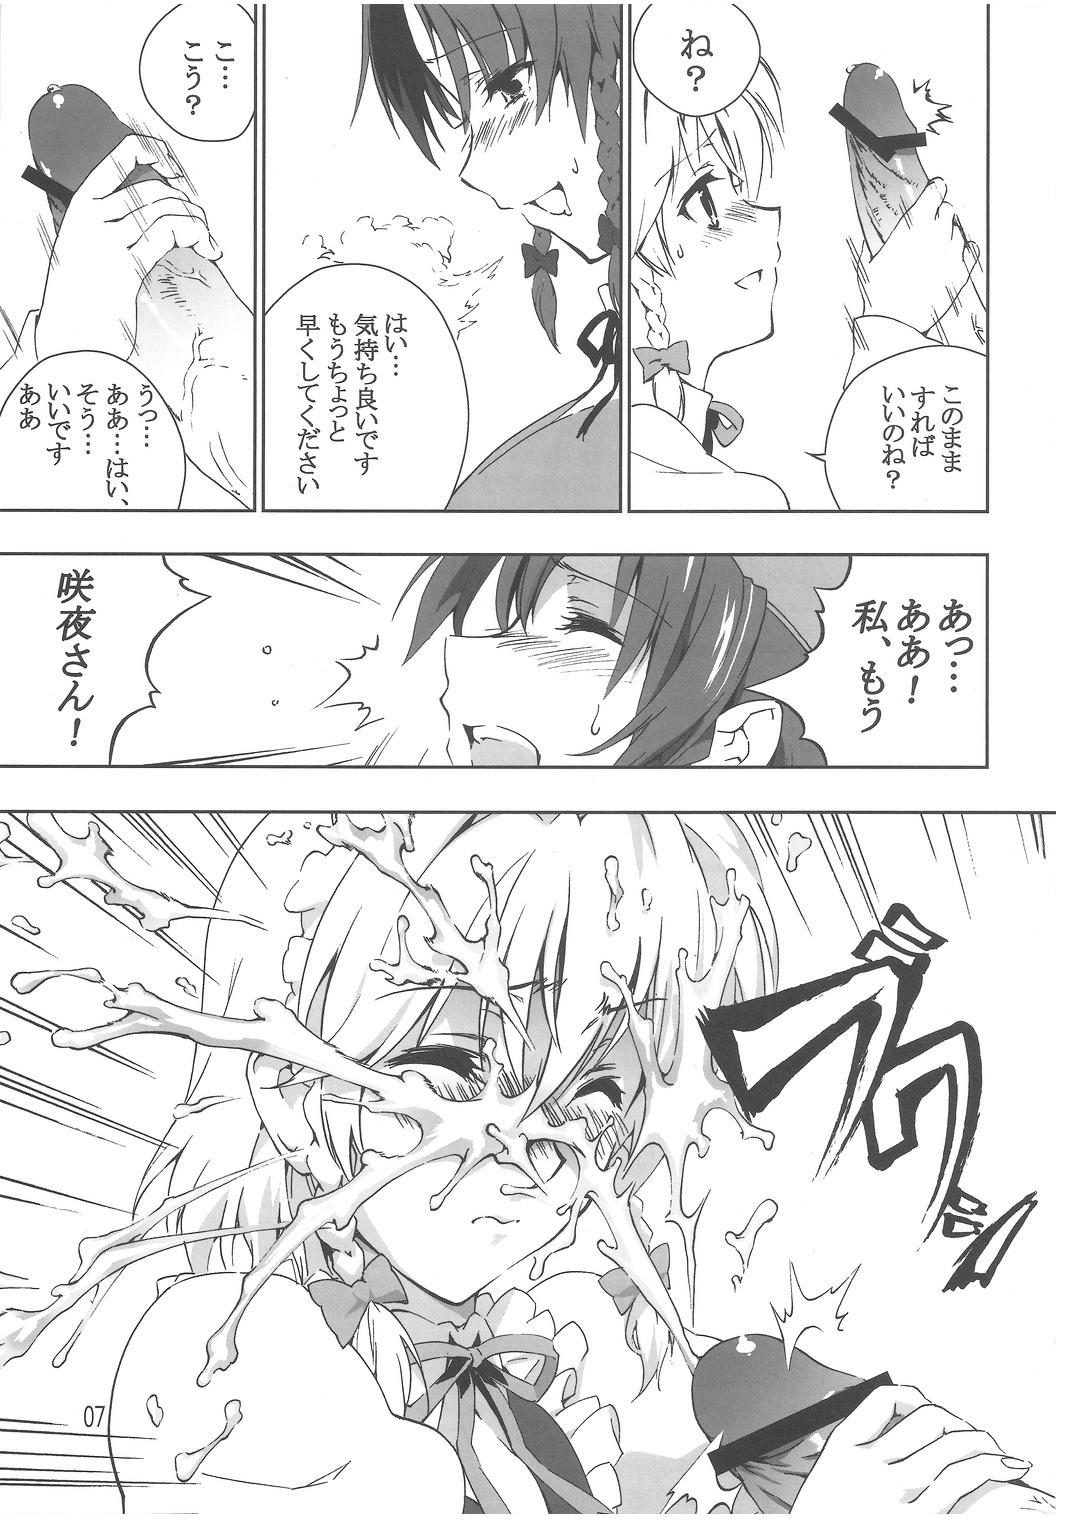 Screaming Chinese Kaichuudokei - Touhou project Amateurs - Page 8